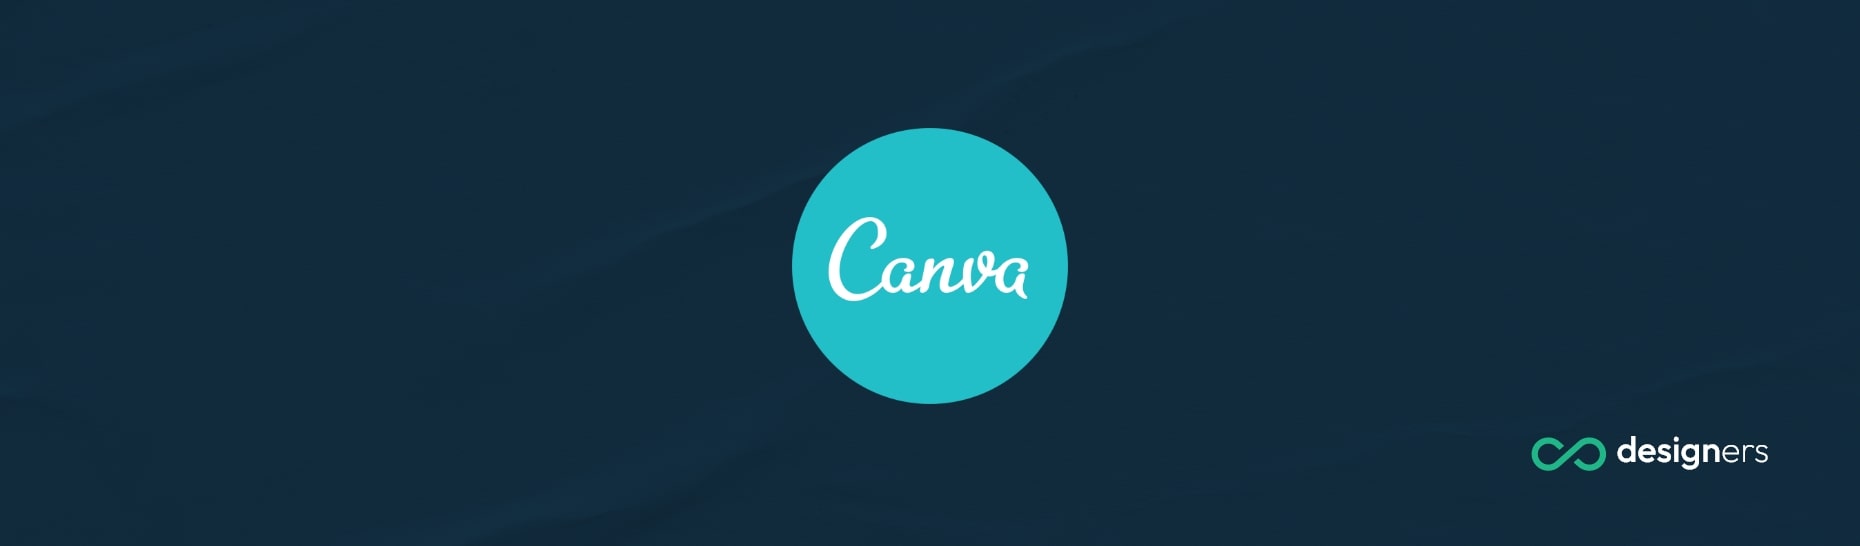 What Font Is Gotham in Canva?